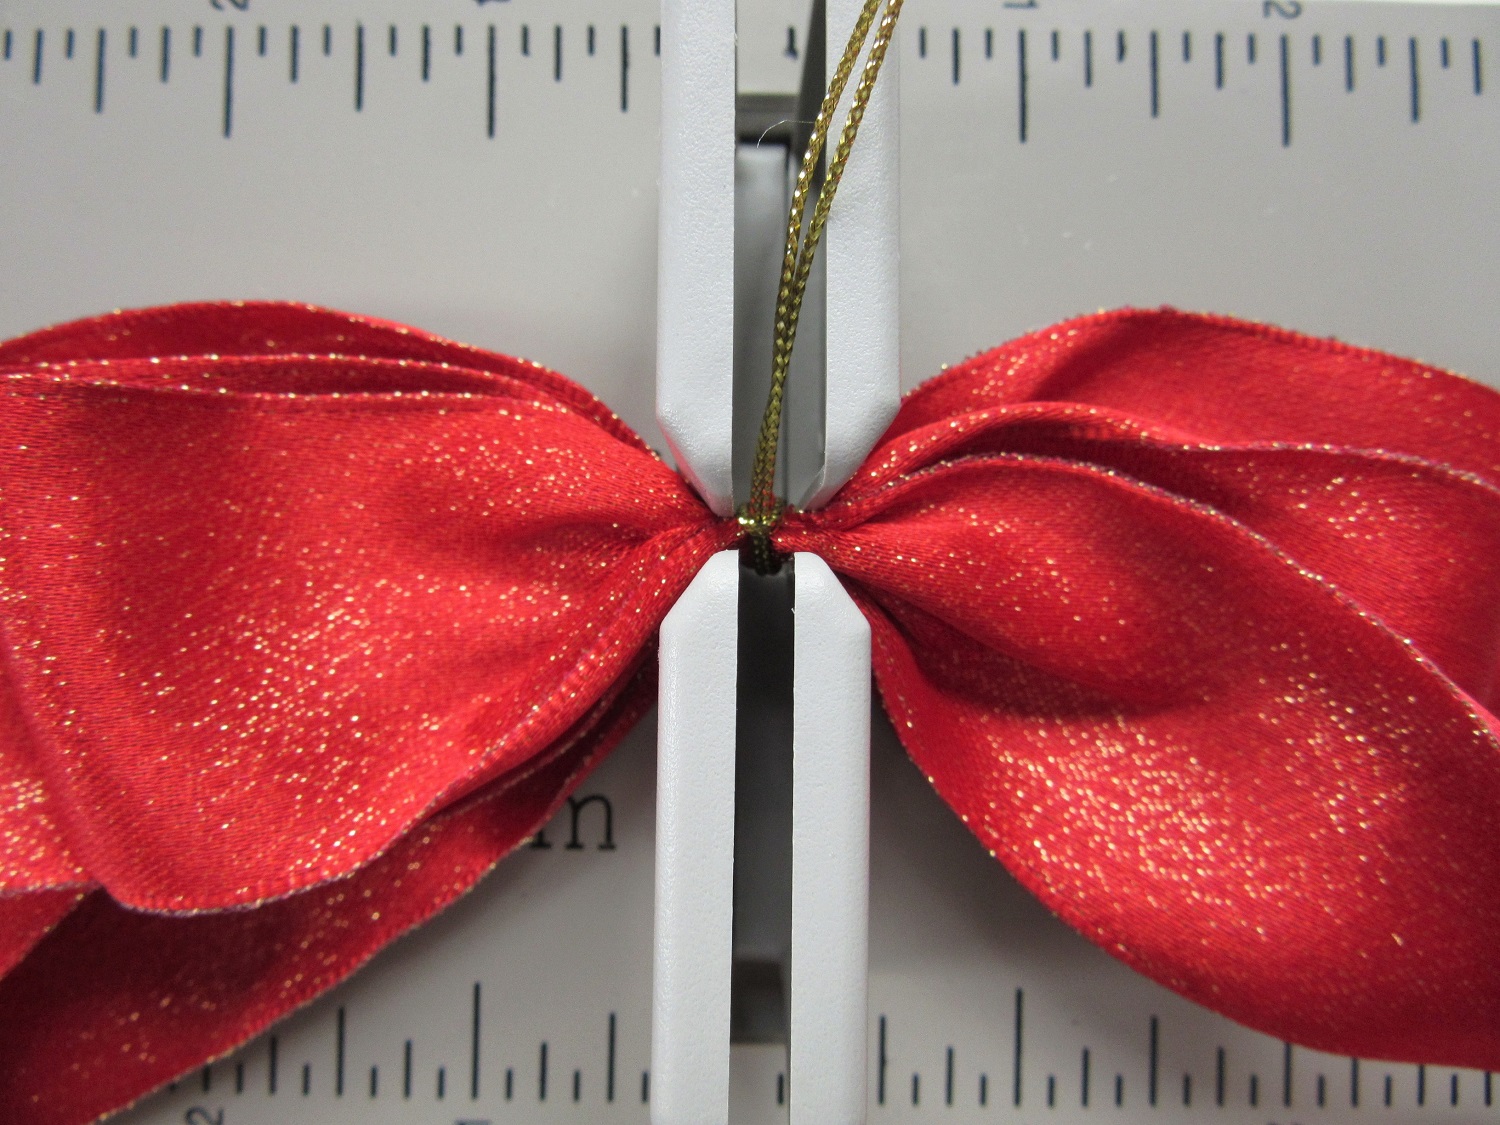 How to Make Satin or Silk Bows in the Bowdabra 